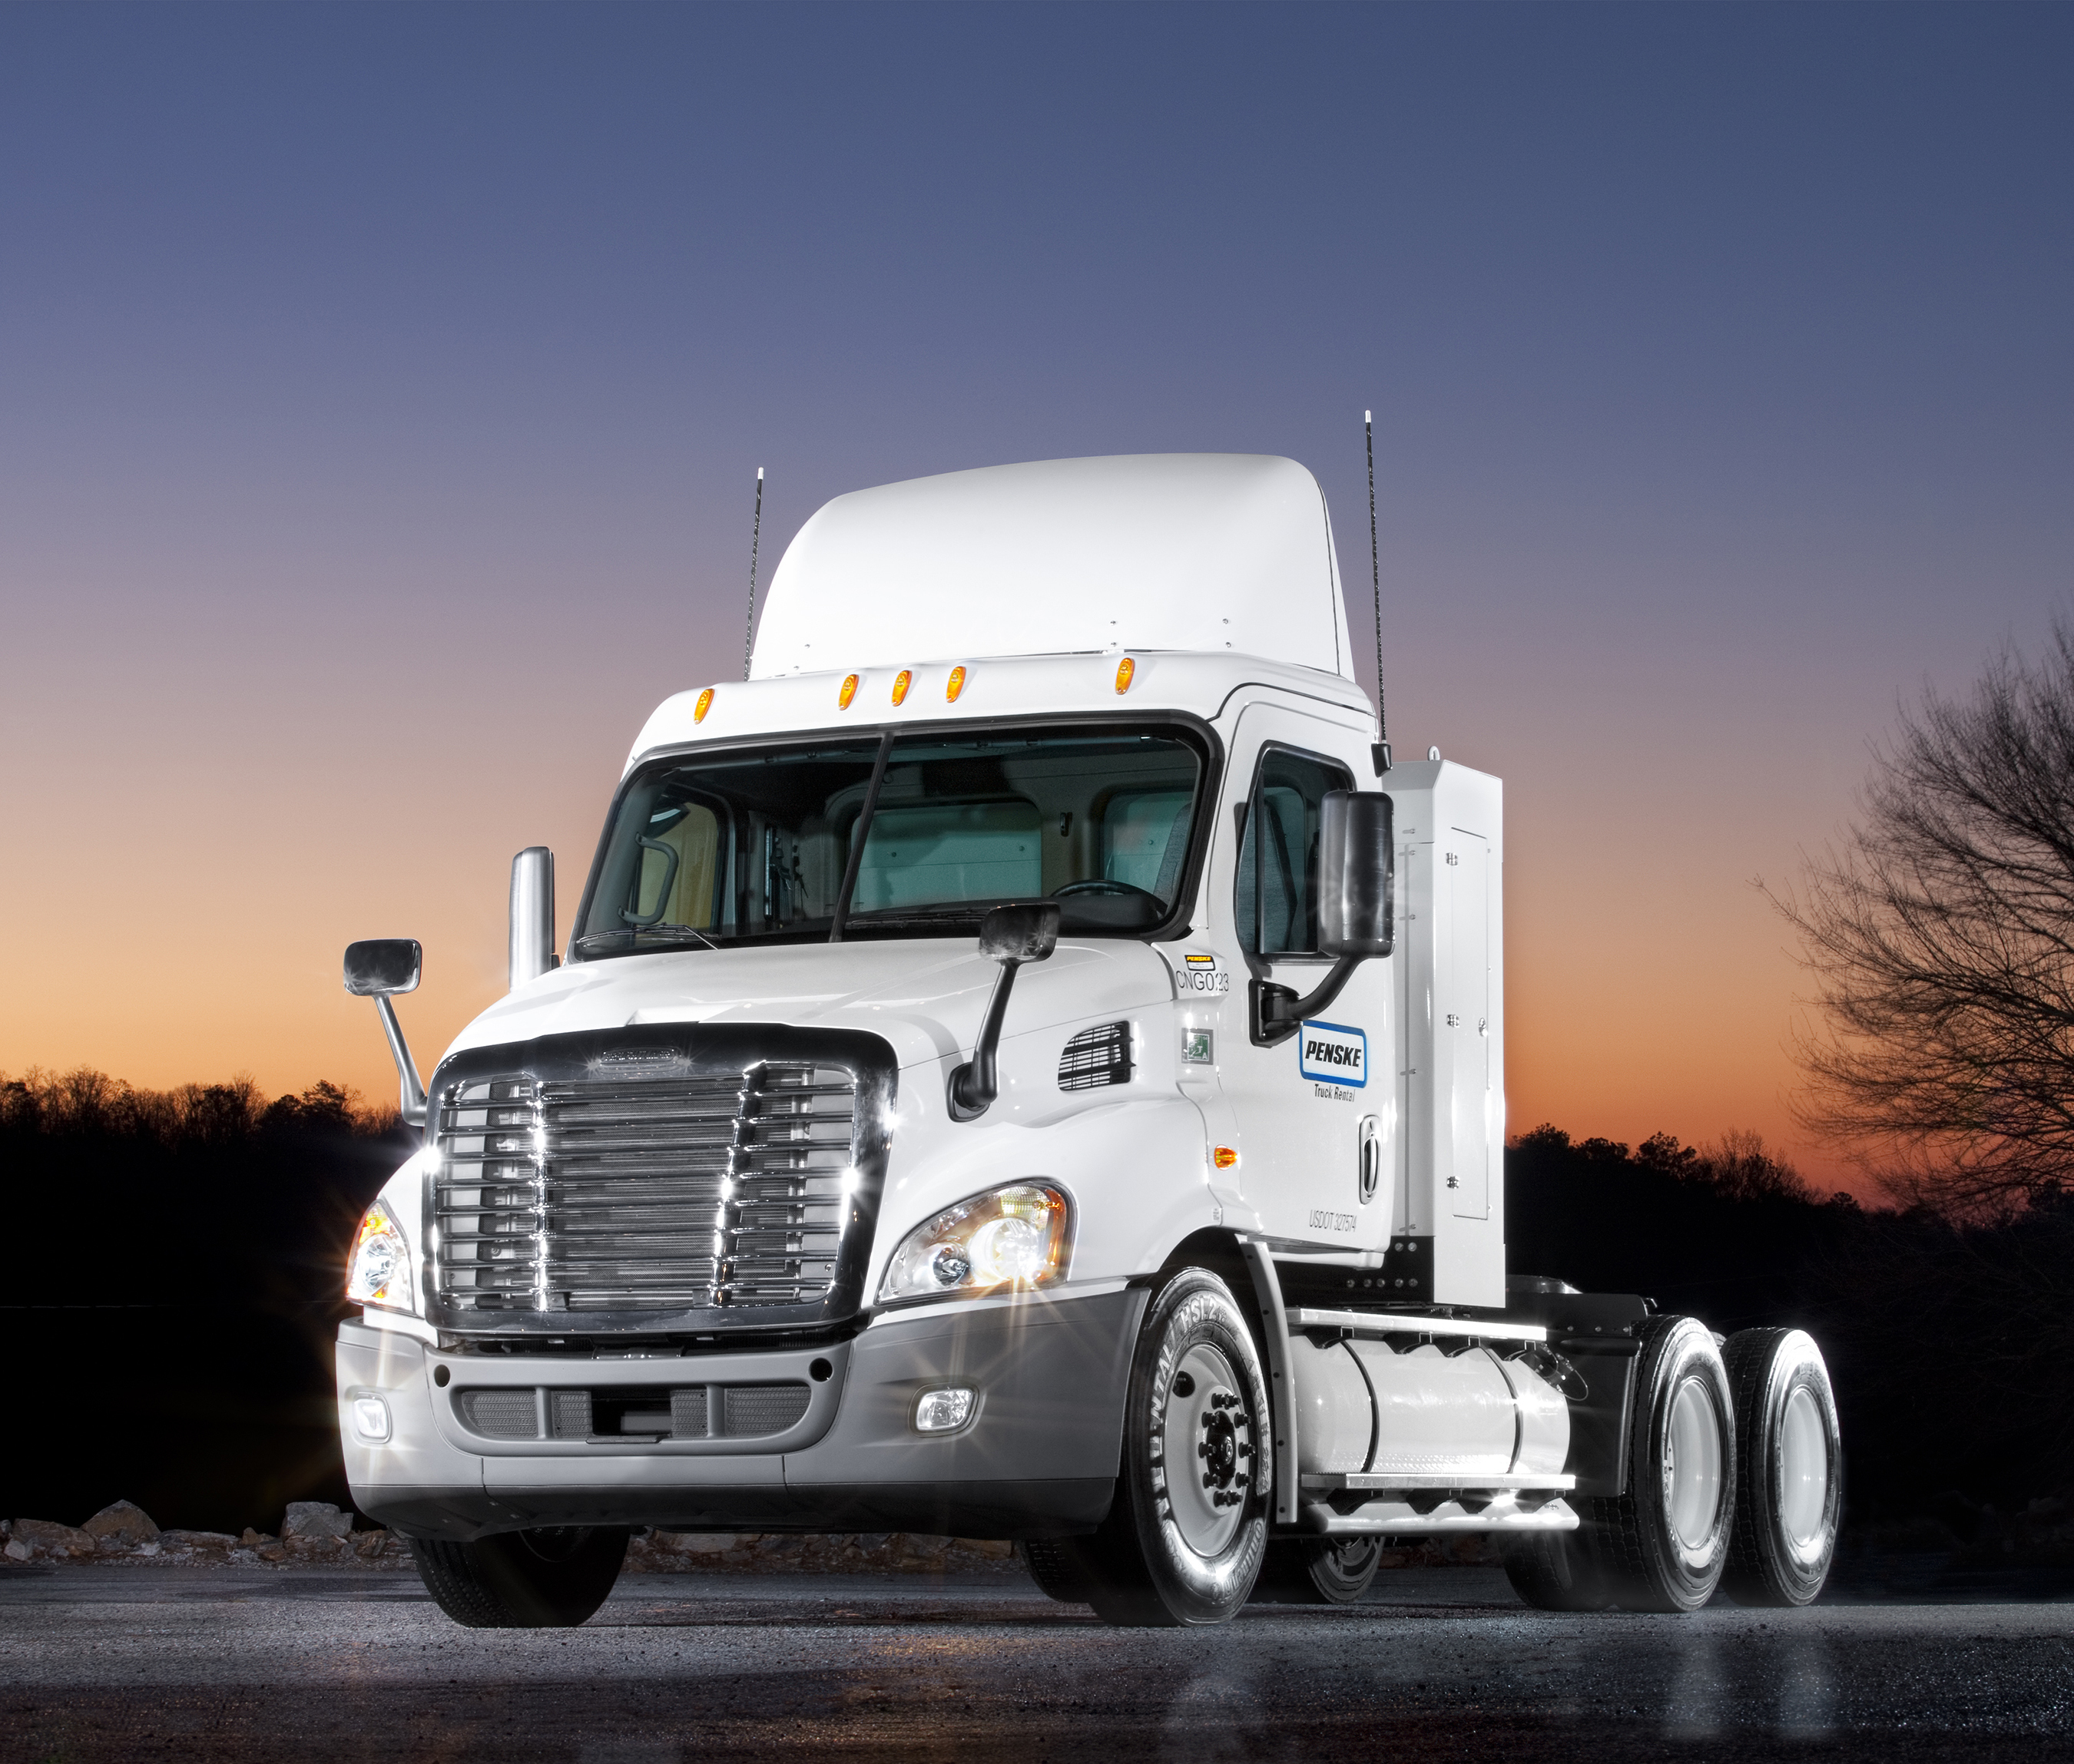 Penske Truck Leasing has been given the Clean Air Excellence Award, in the Clear Air Technology category, by the U.S. Environmental Protection Agency (EPA). This is the first time the company has received this award.